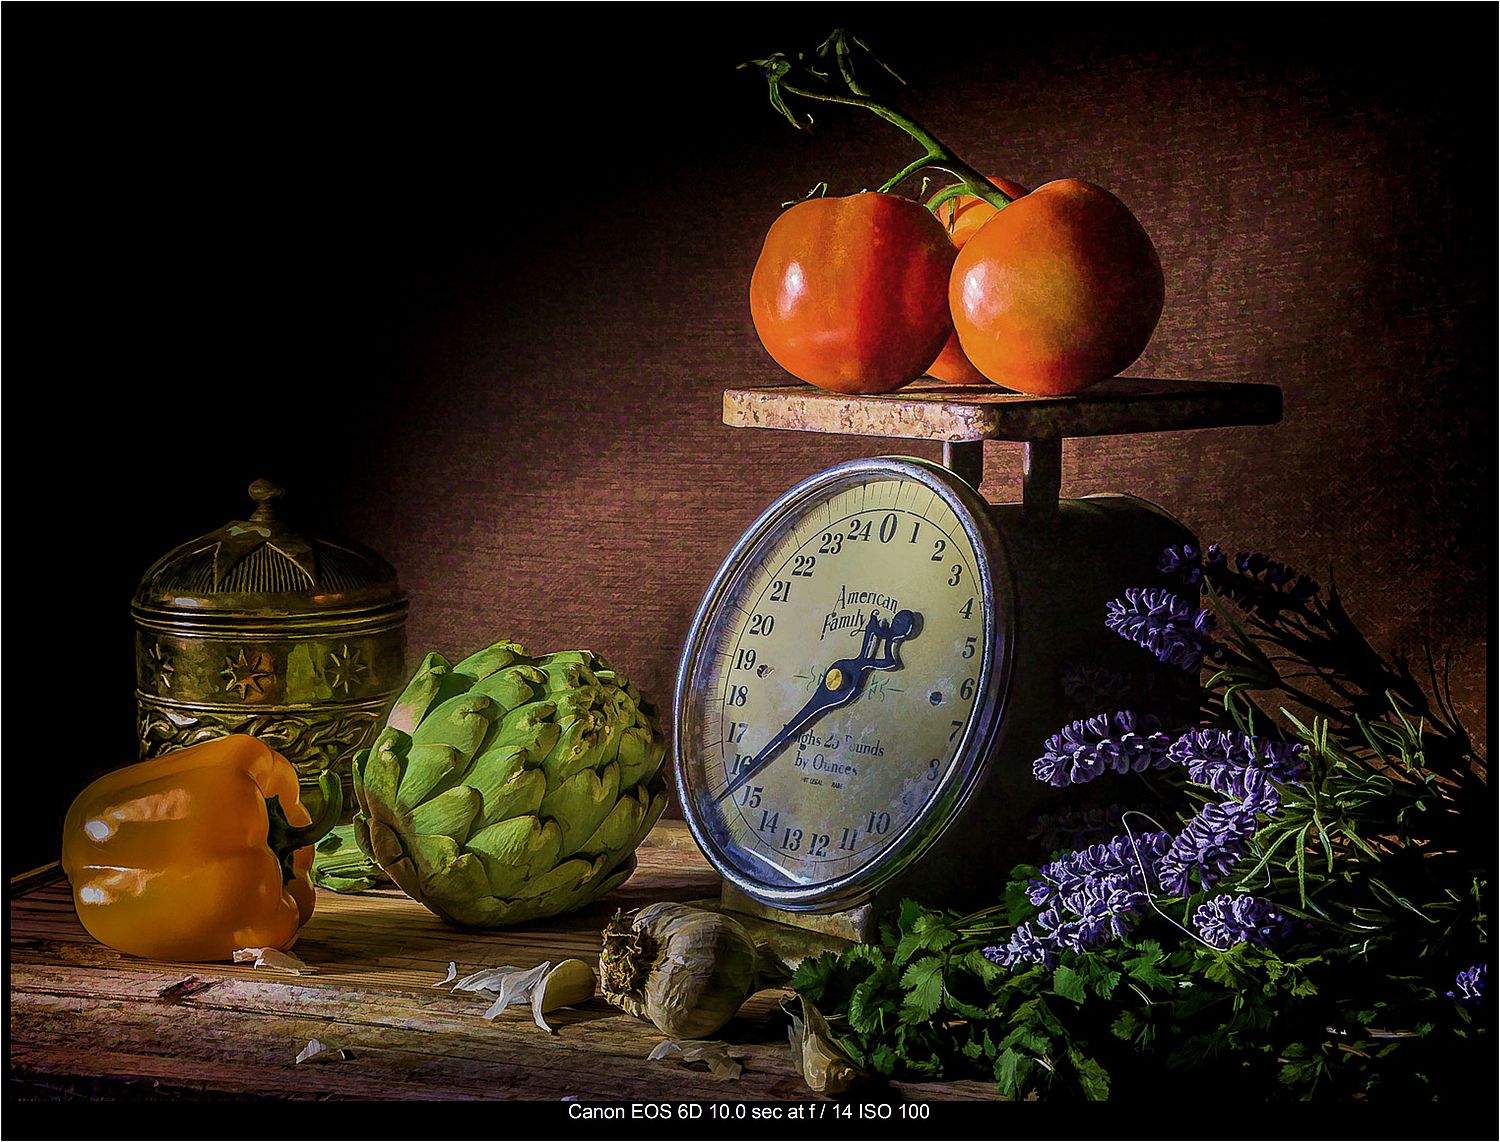 Great Fruit And Vegetable Still Life Photography Ideas